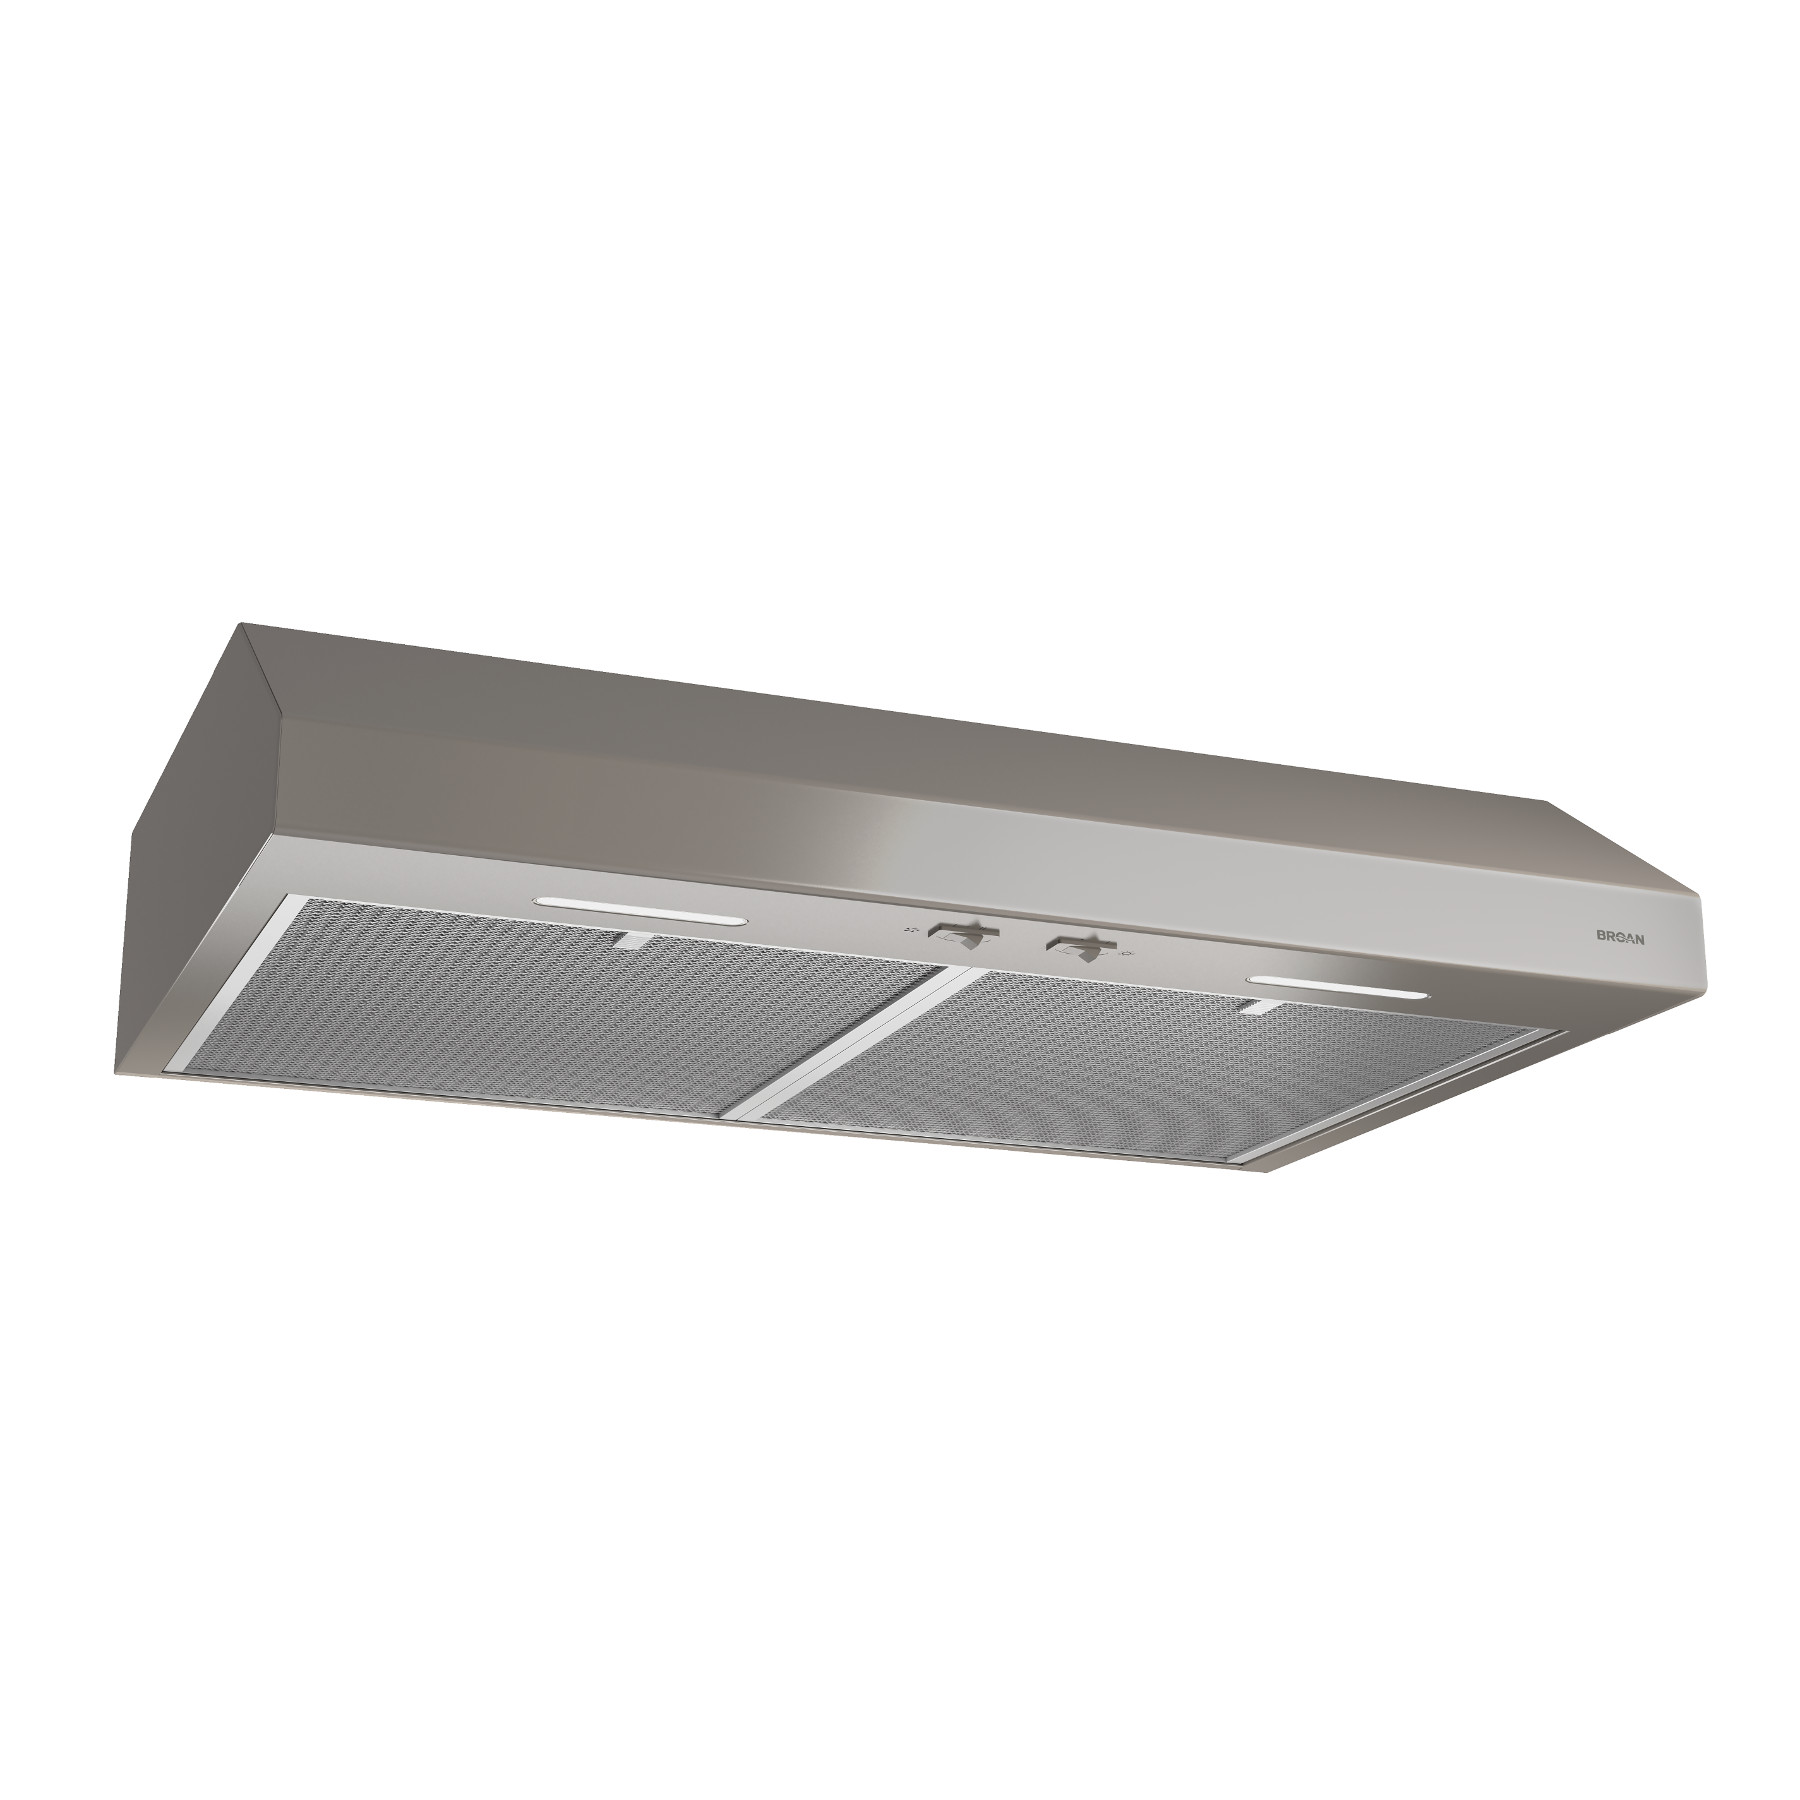 **DISCONTINUED** Broan® 30-Inch Convertible Under-Cabinet Range Hood, ENERGY STAR®,  300 Max Blower CFM, Slate